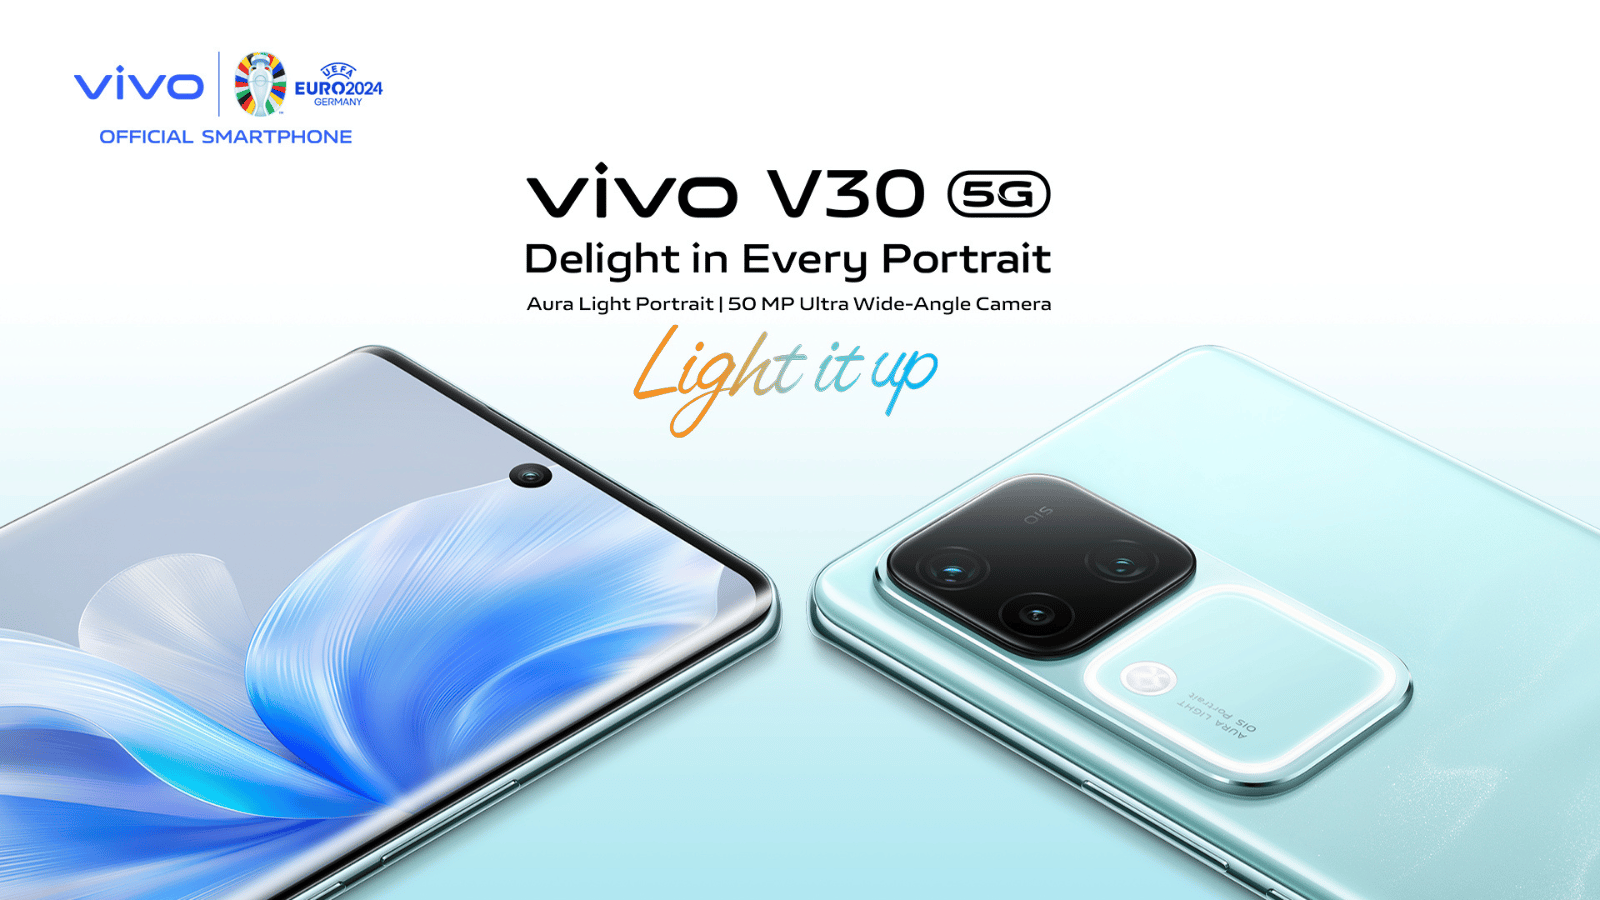 All about the highly anticipated Vivo V30 5G